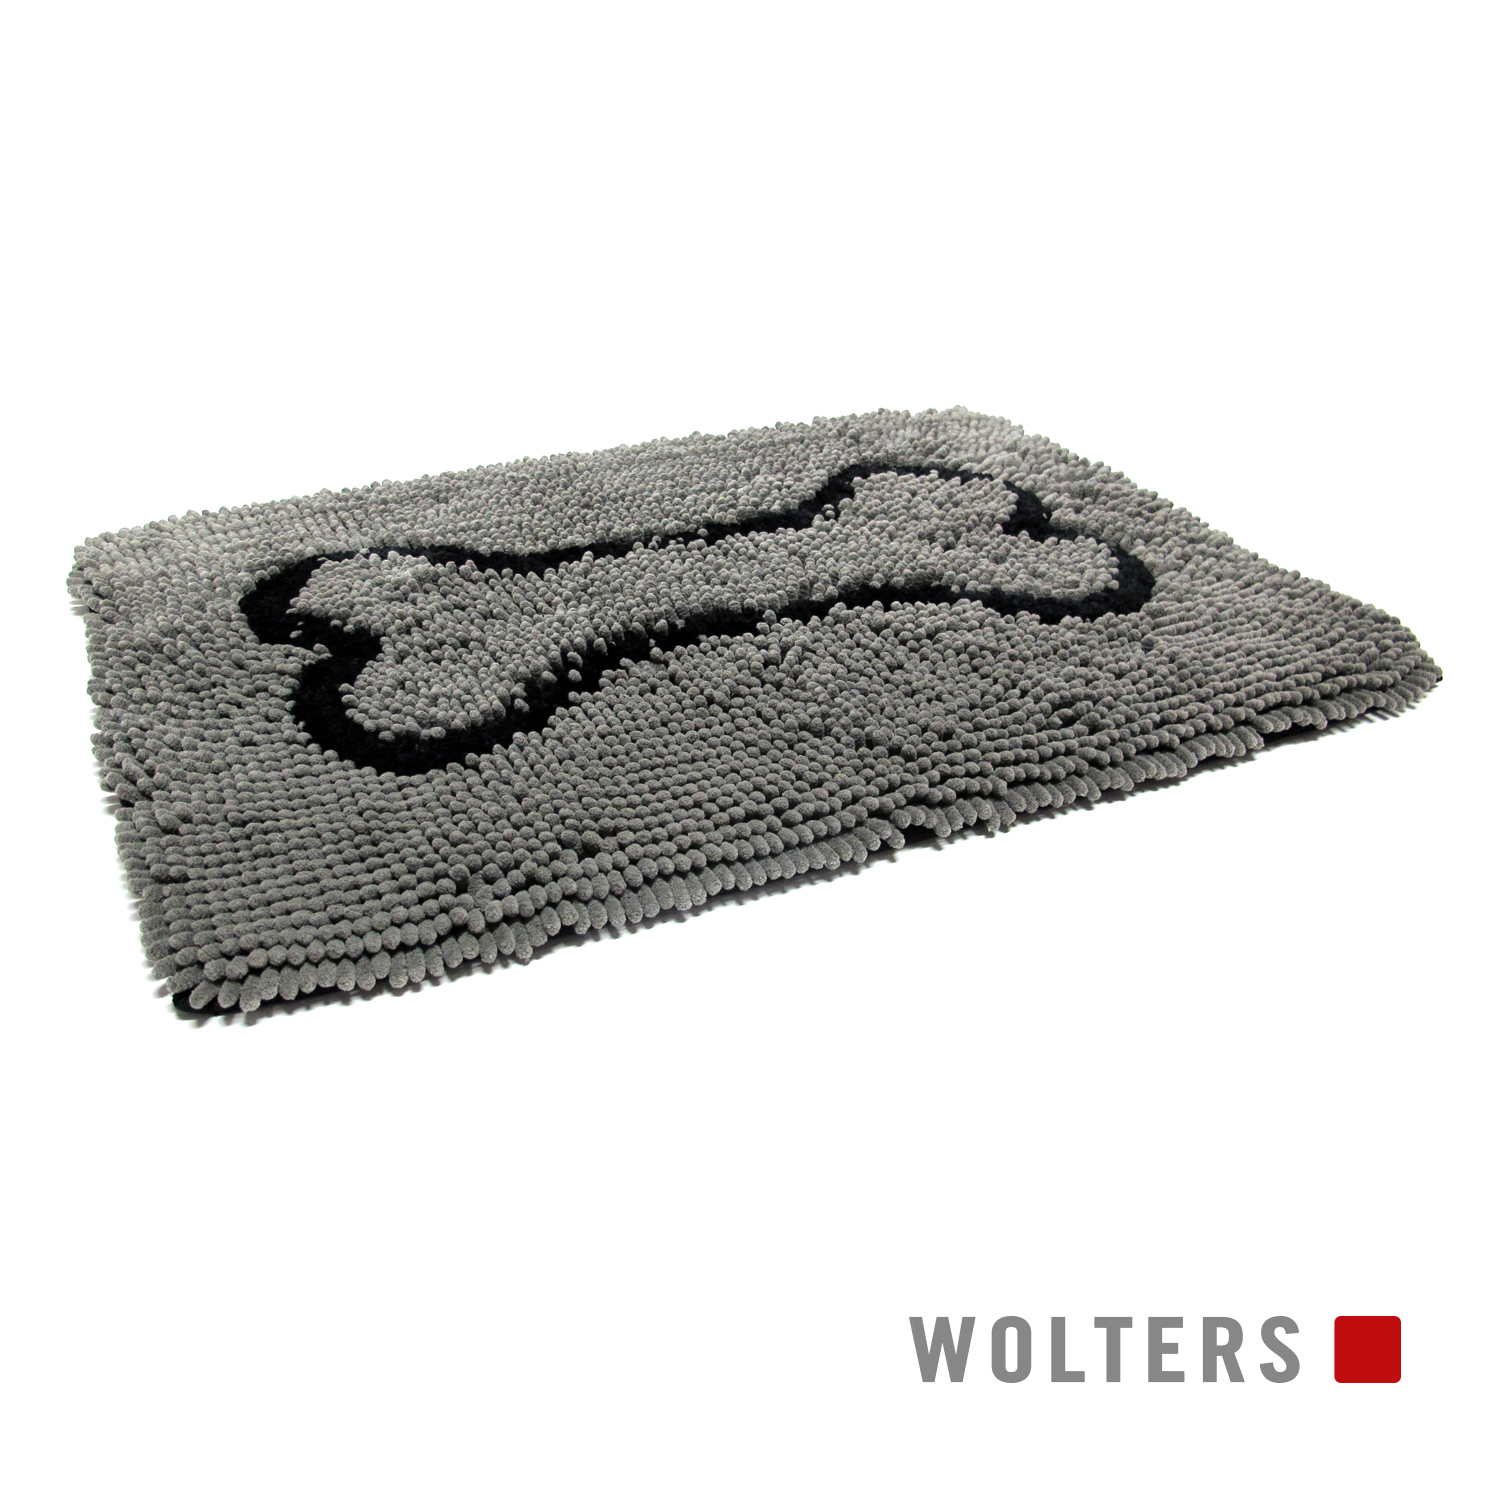 Wolters Dirty Dog Doormat - grau